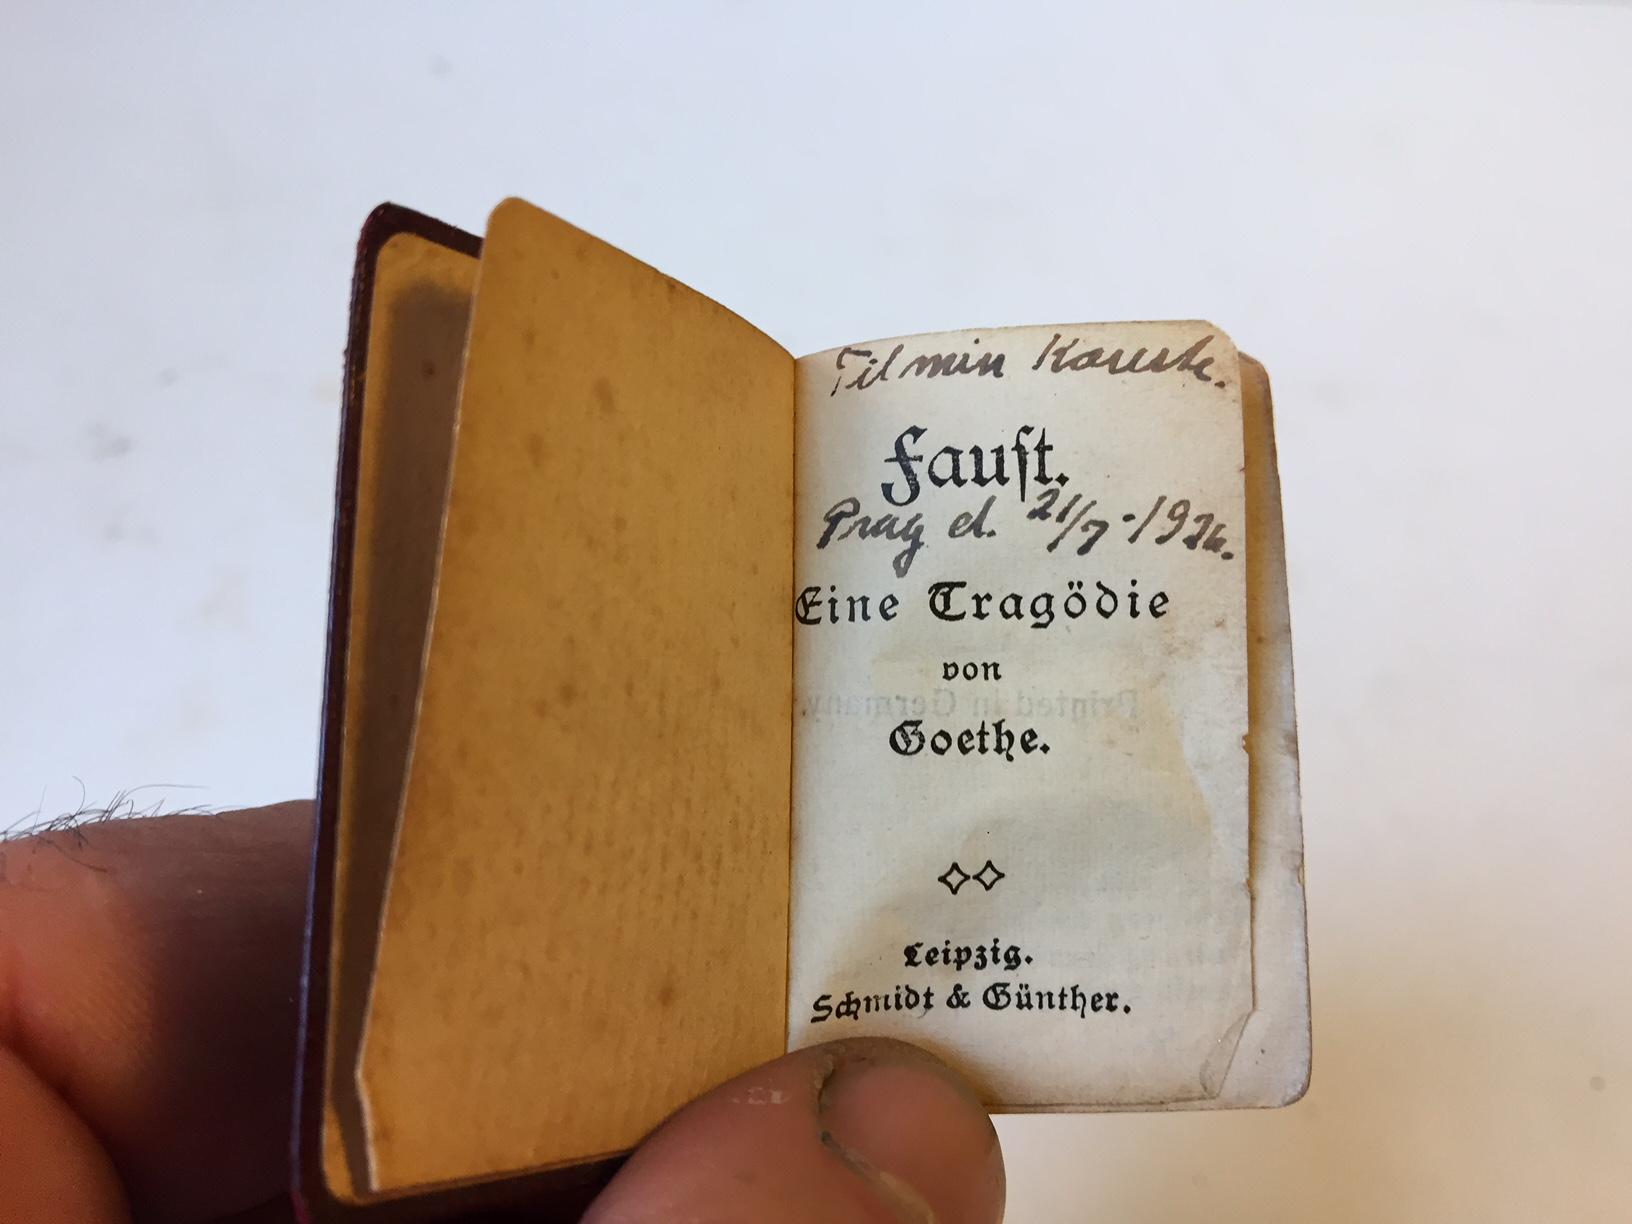 Faust volume 1 & 2 by Johann Wolgang Goethe. Printed in these miniature version by Schmidt & Günther in Leipzig, Germany in 1907. The share the same distinct qualities as regular classics; leather binding and gilded edges to the pages. The set was